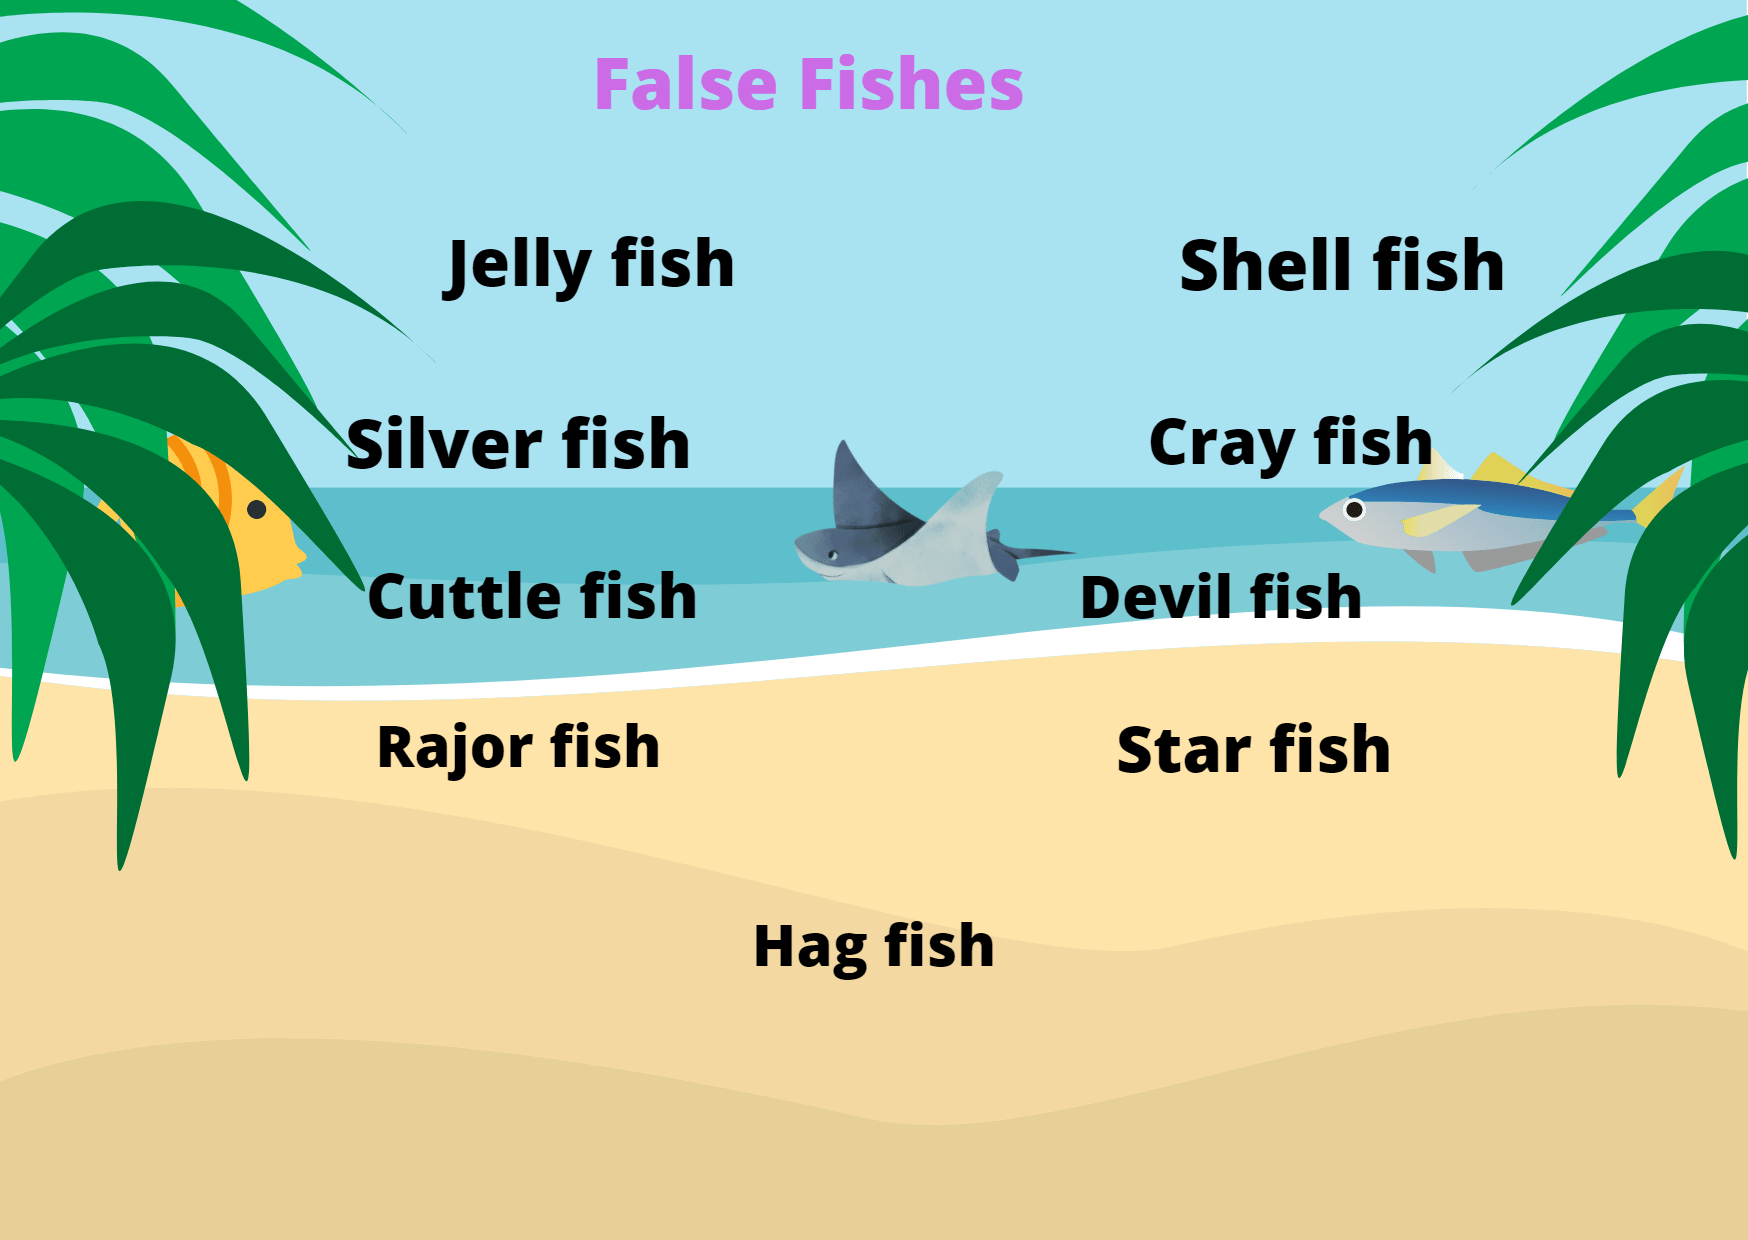 False Fish |Examples with its Phylum